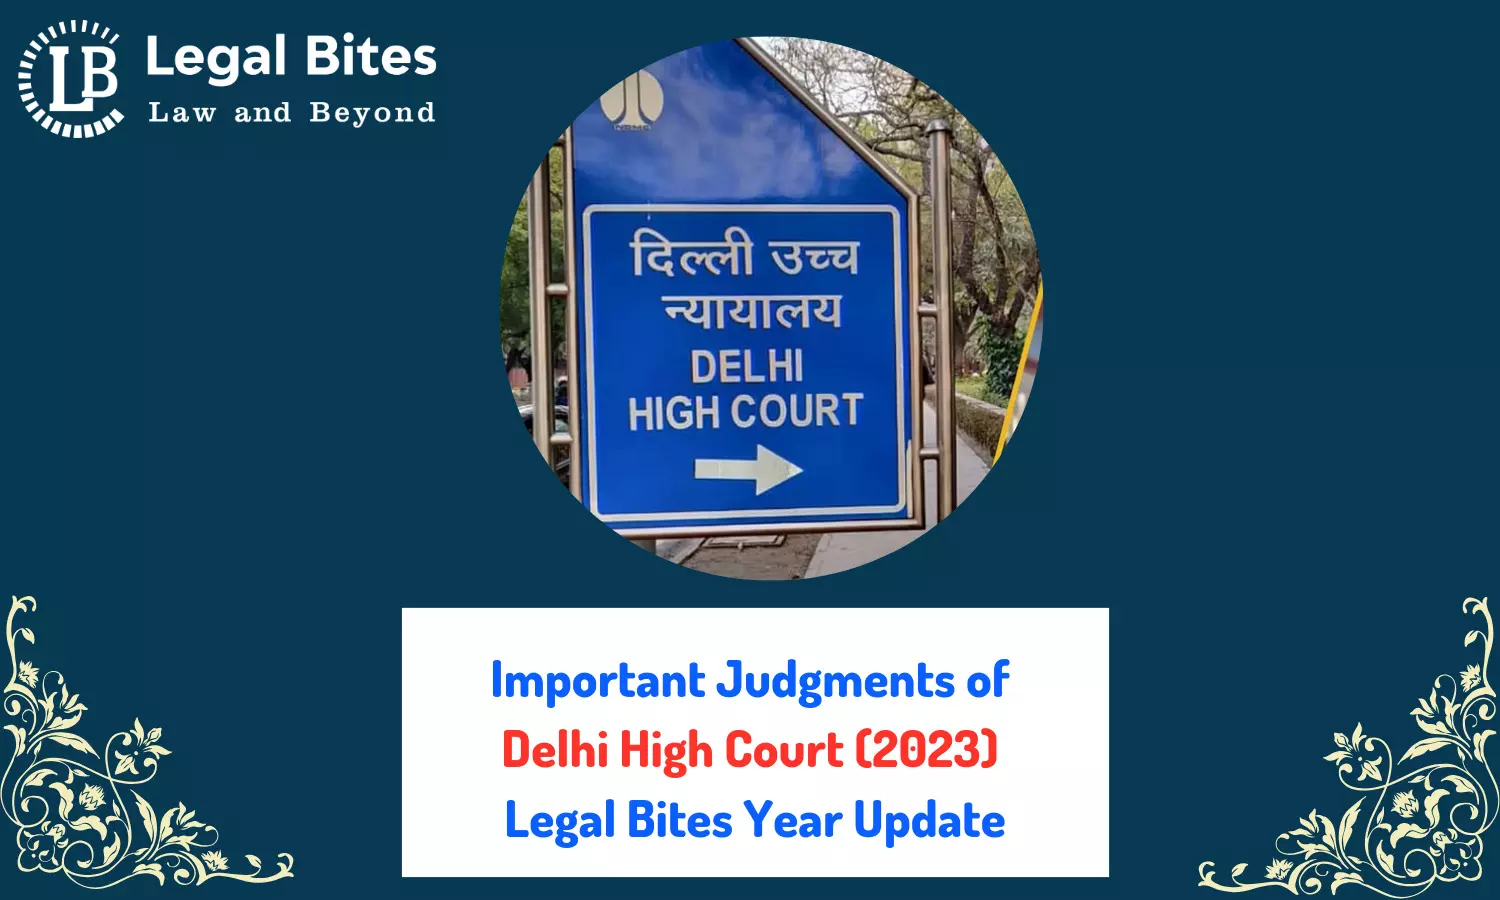 Important Judgments of Delhi High Court (2023) - Legal Bites Year Update